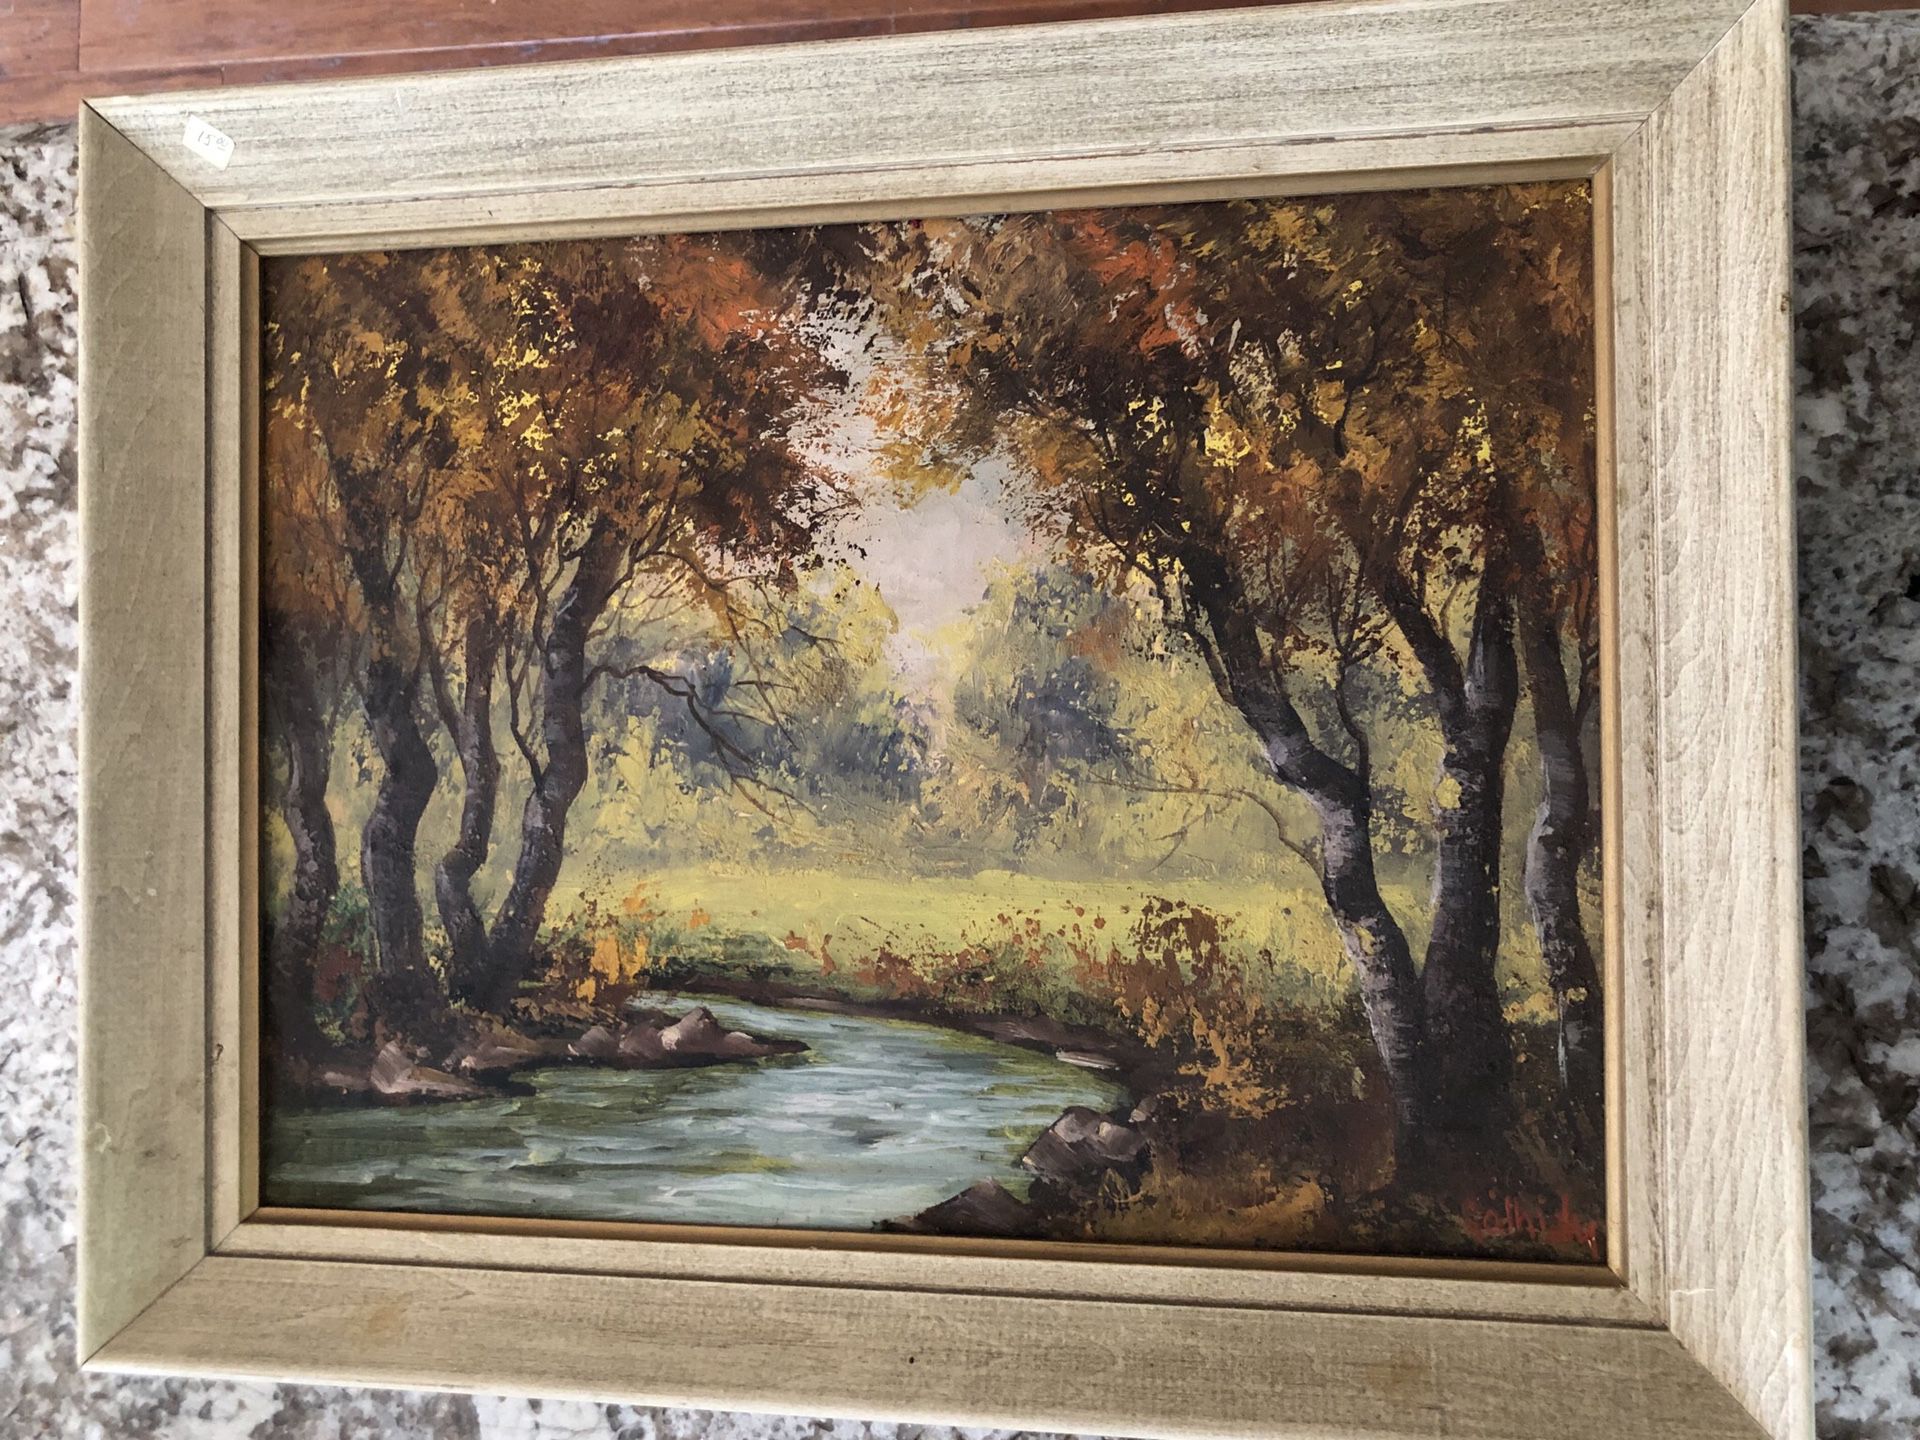 15”X19” Framed Nature Oil Painting